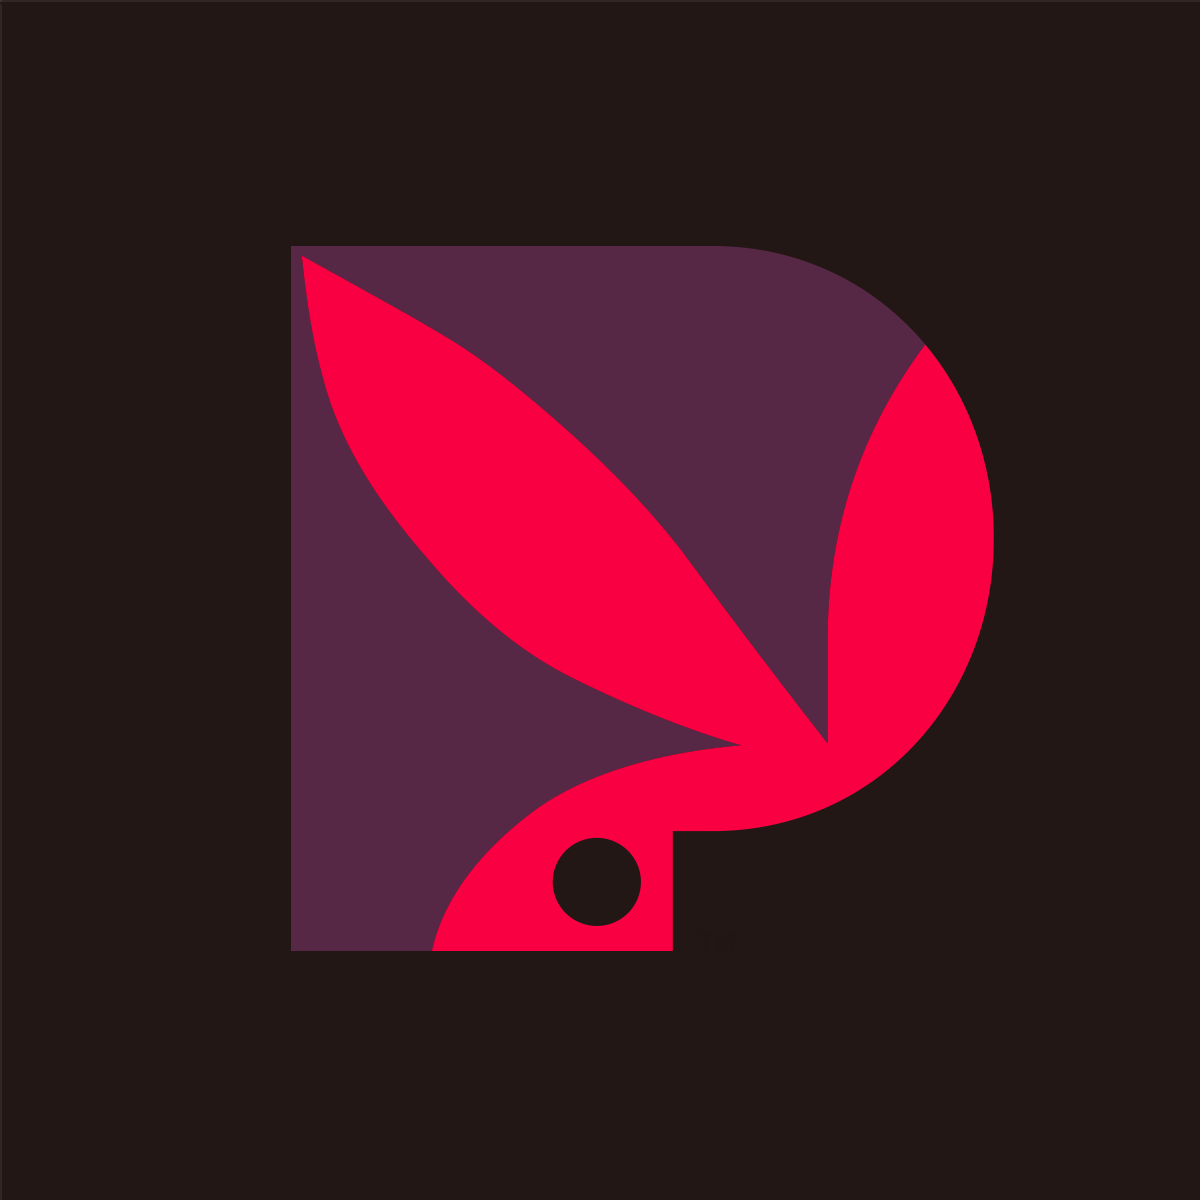 Playboy Spirits Joint Venture Closes More Than $13 Million in Funding to Accelerate Growth in the Multi-Billion Dollar Alcohol Beverage Category